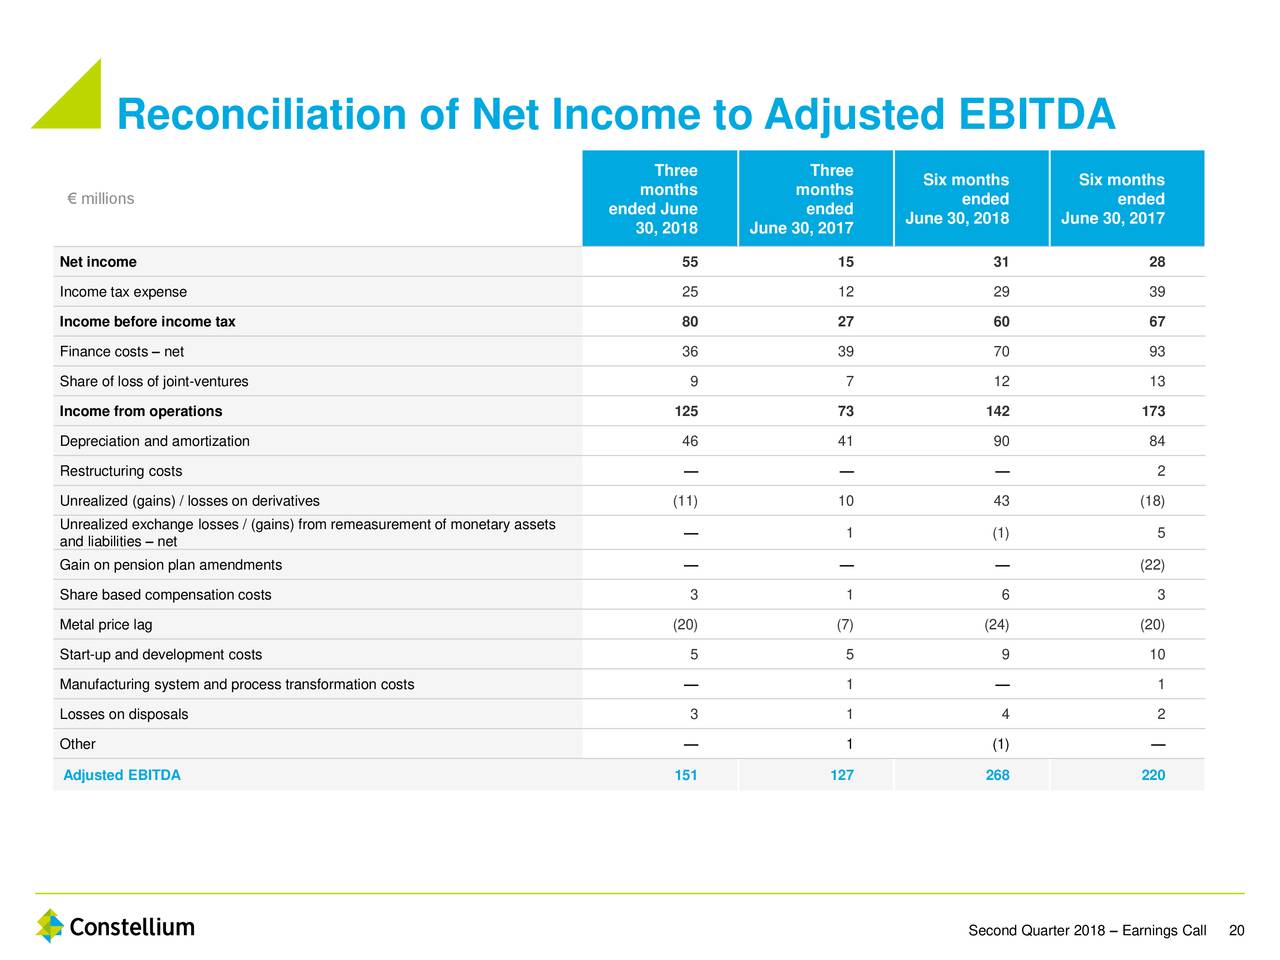 Reconciliation of Net Income to Adjusted EBITDA